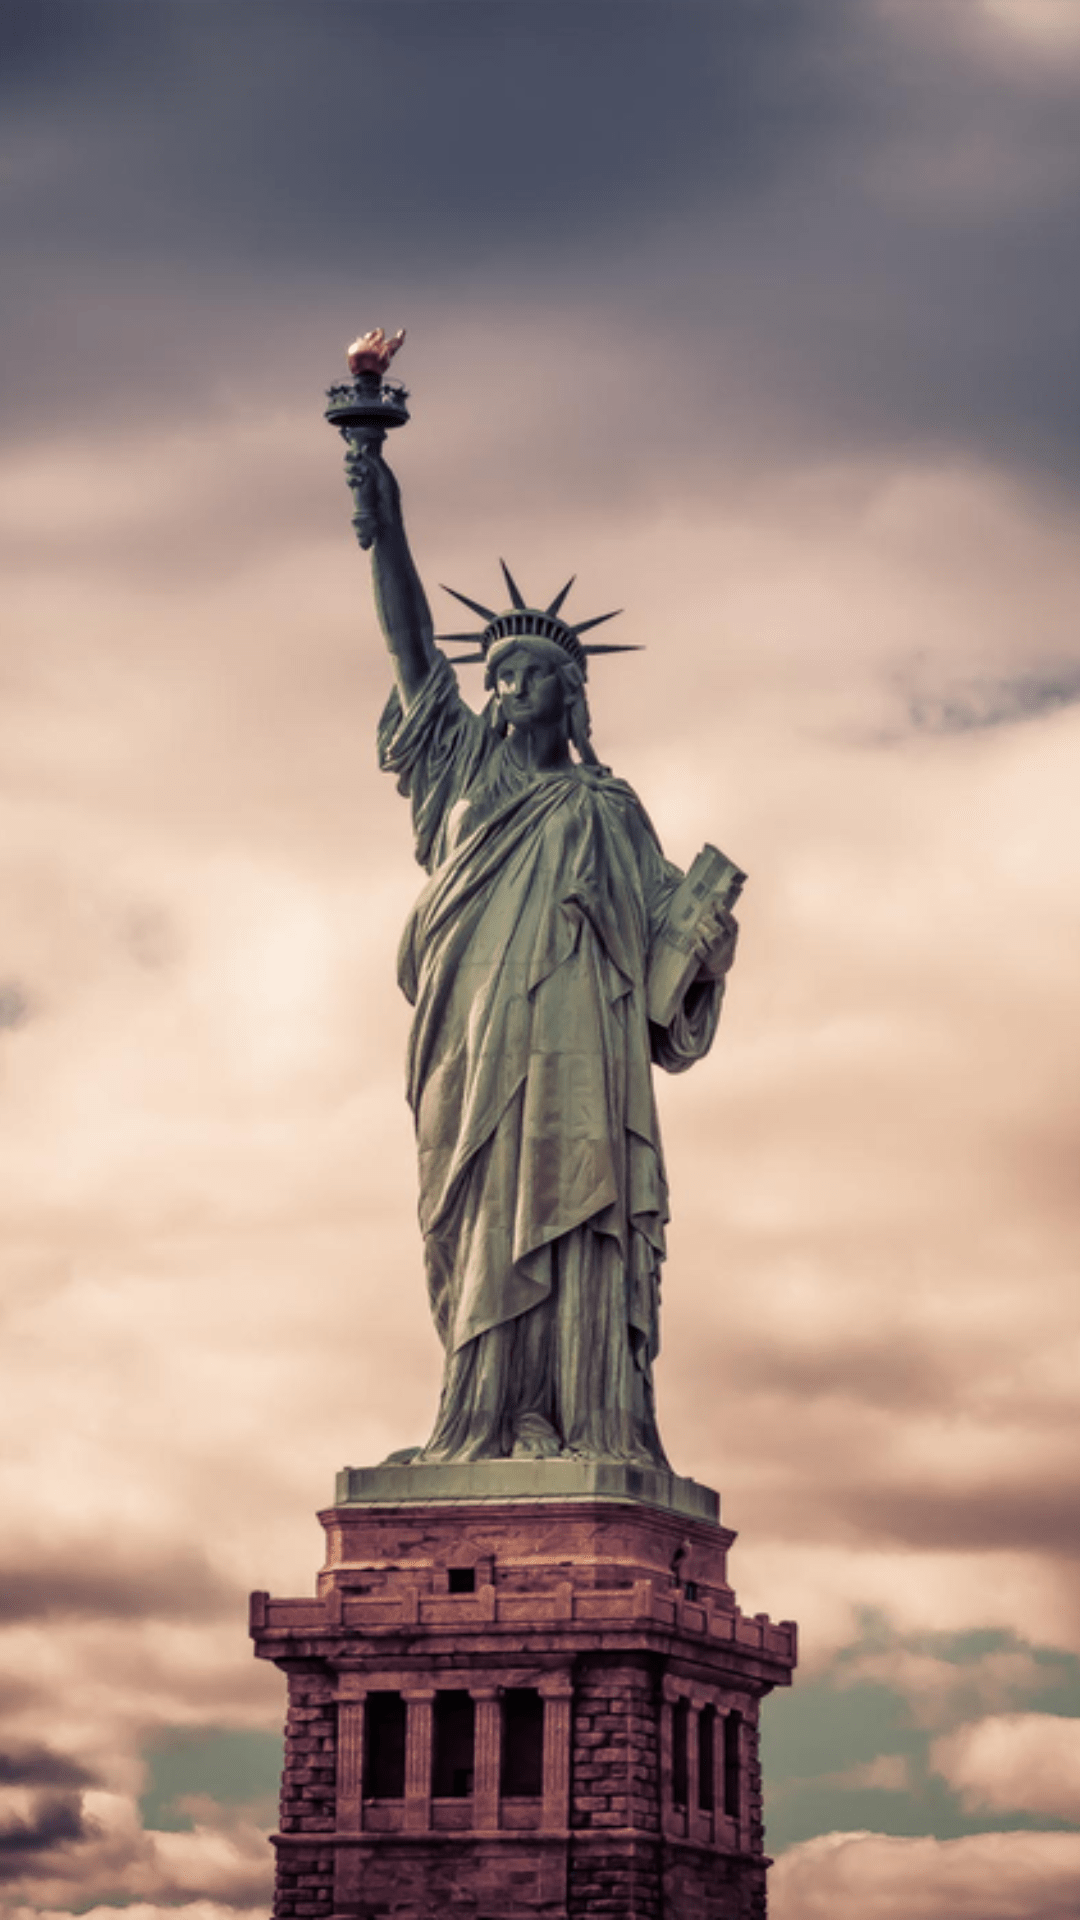 The statue of liberty with a cloudy sky in the background. - Statue